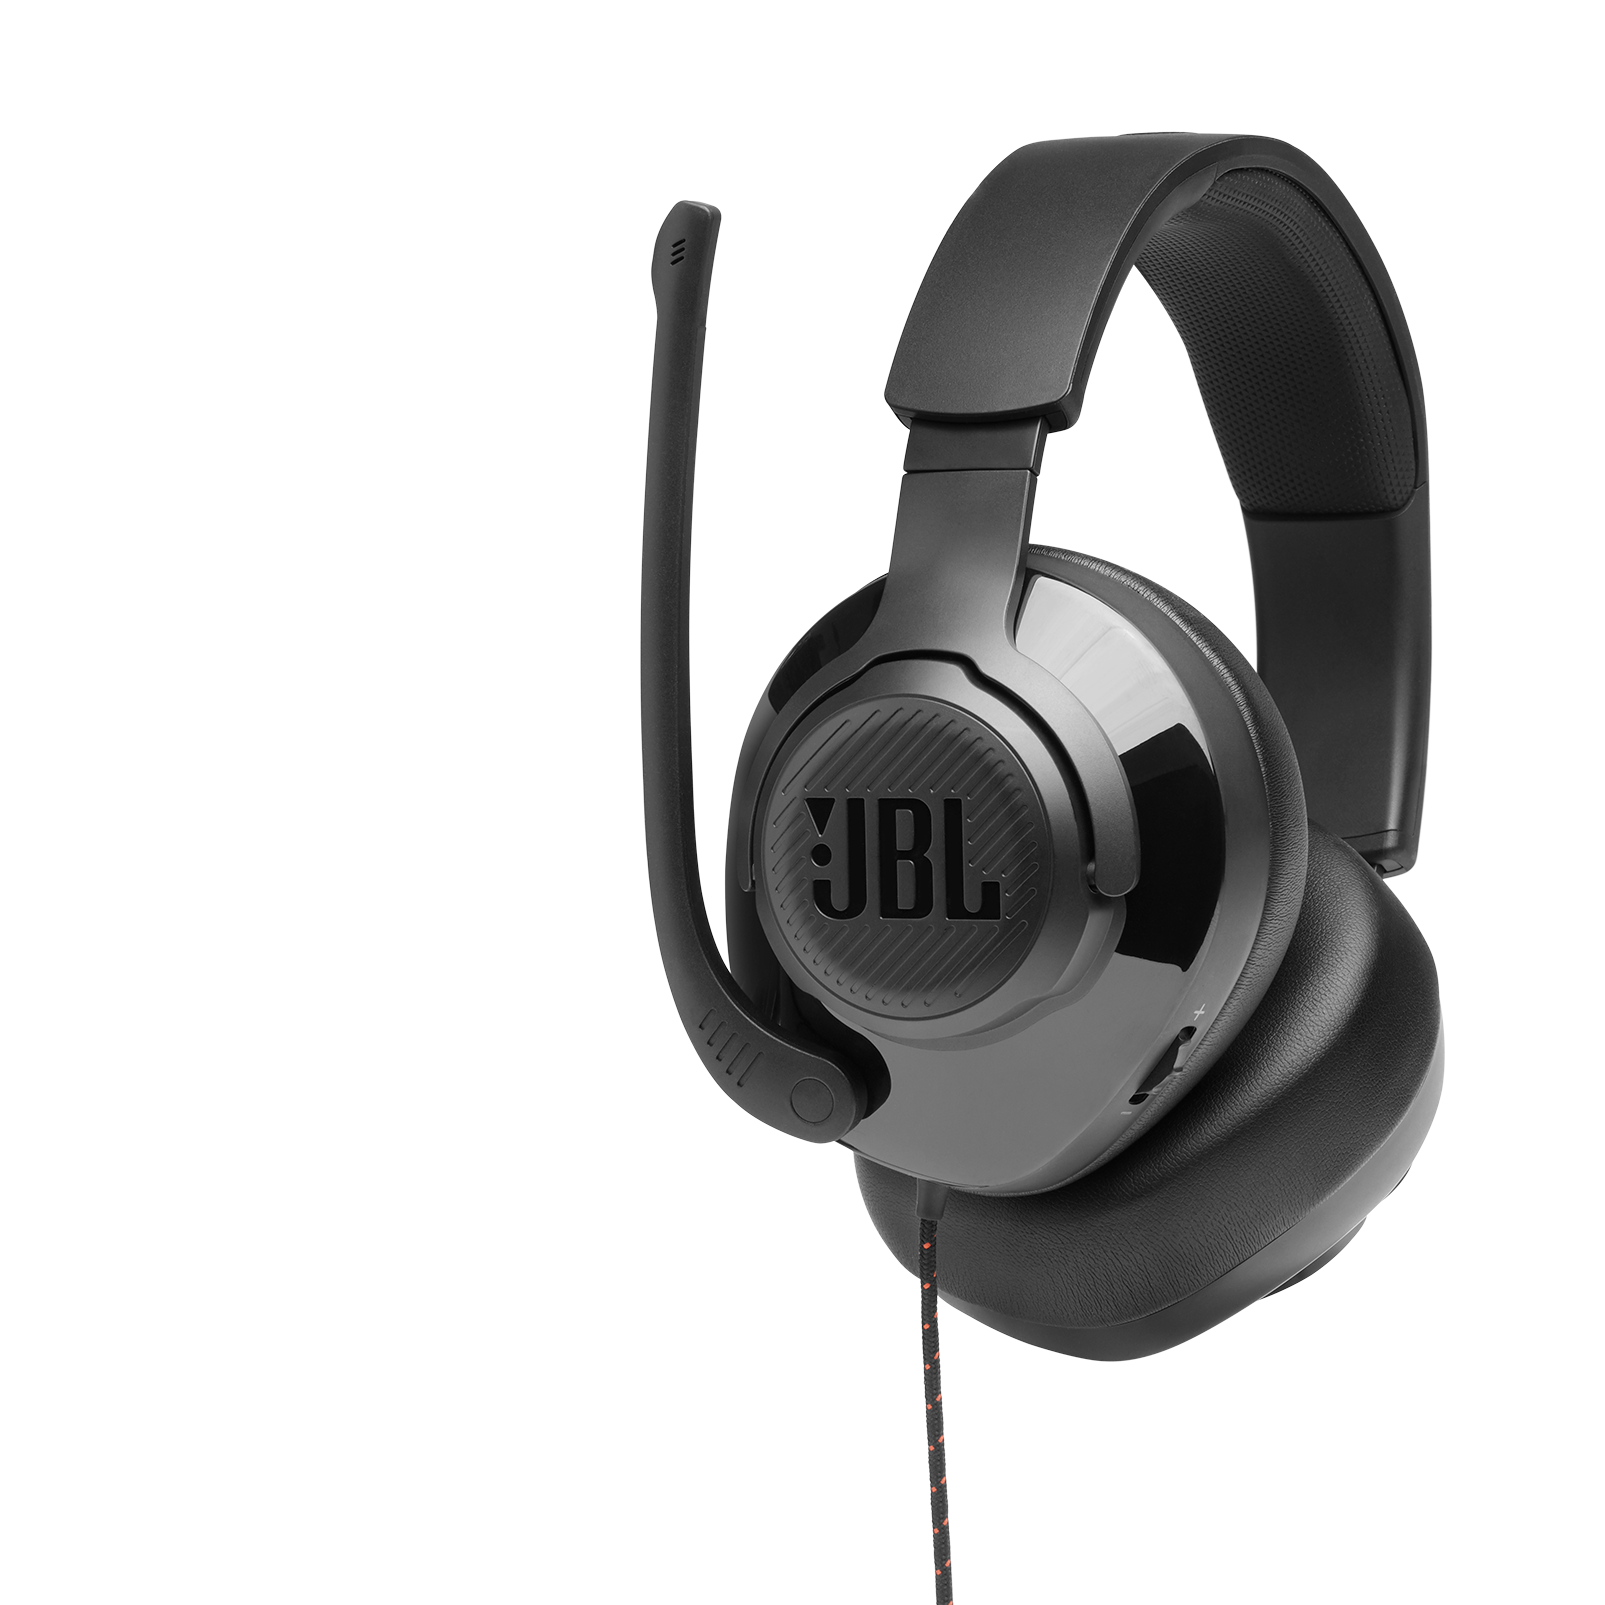 JBL Quantum 200 - Black - Wired over-ear gaming headset with flip-up mic - Detailshot 1